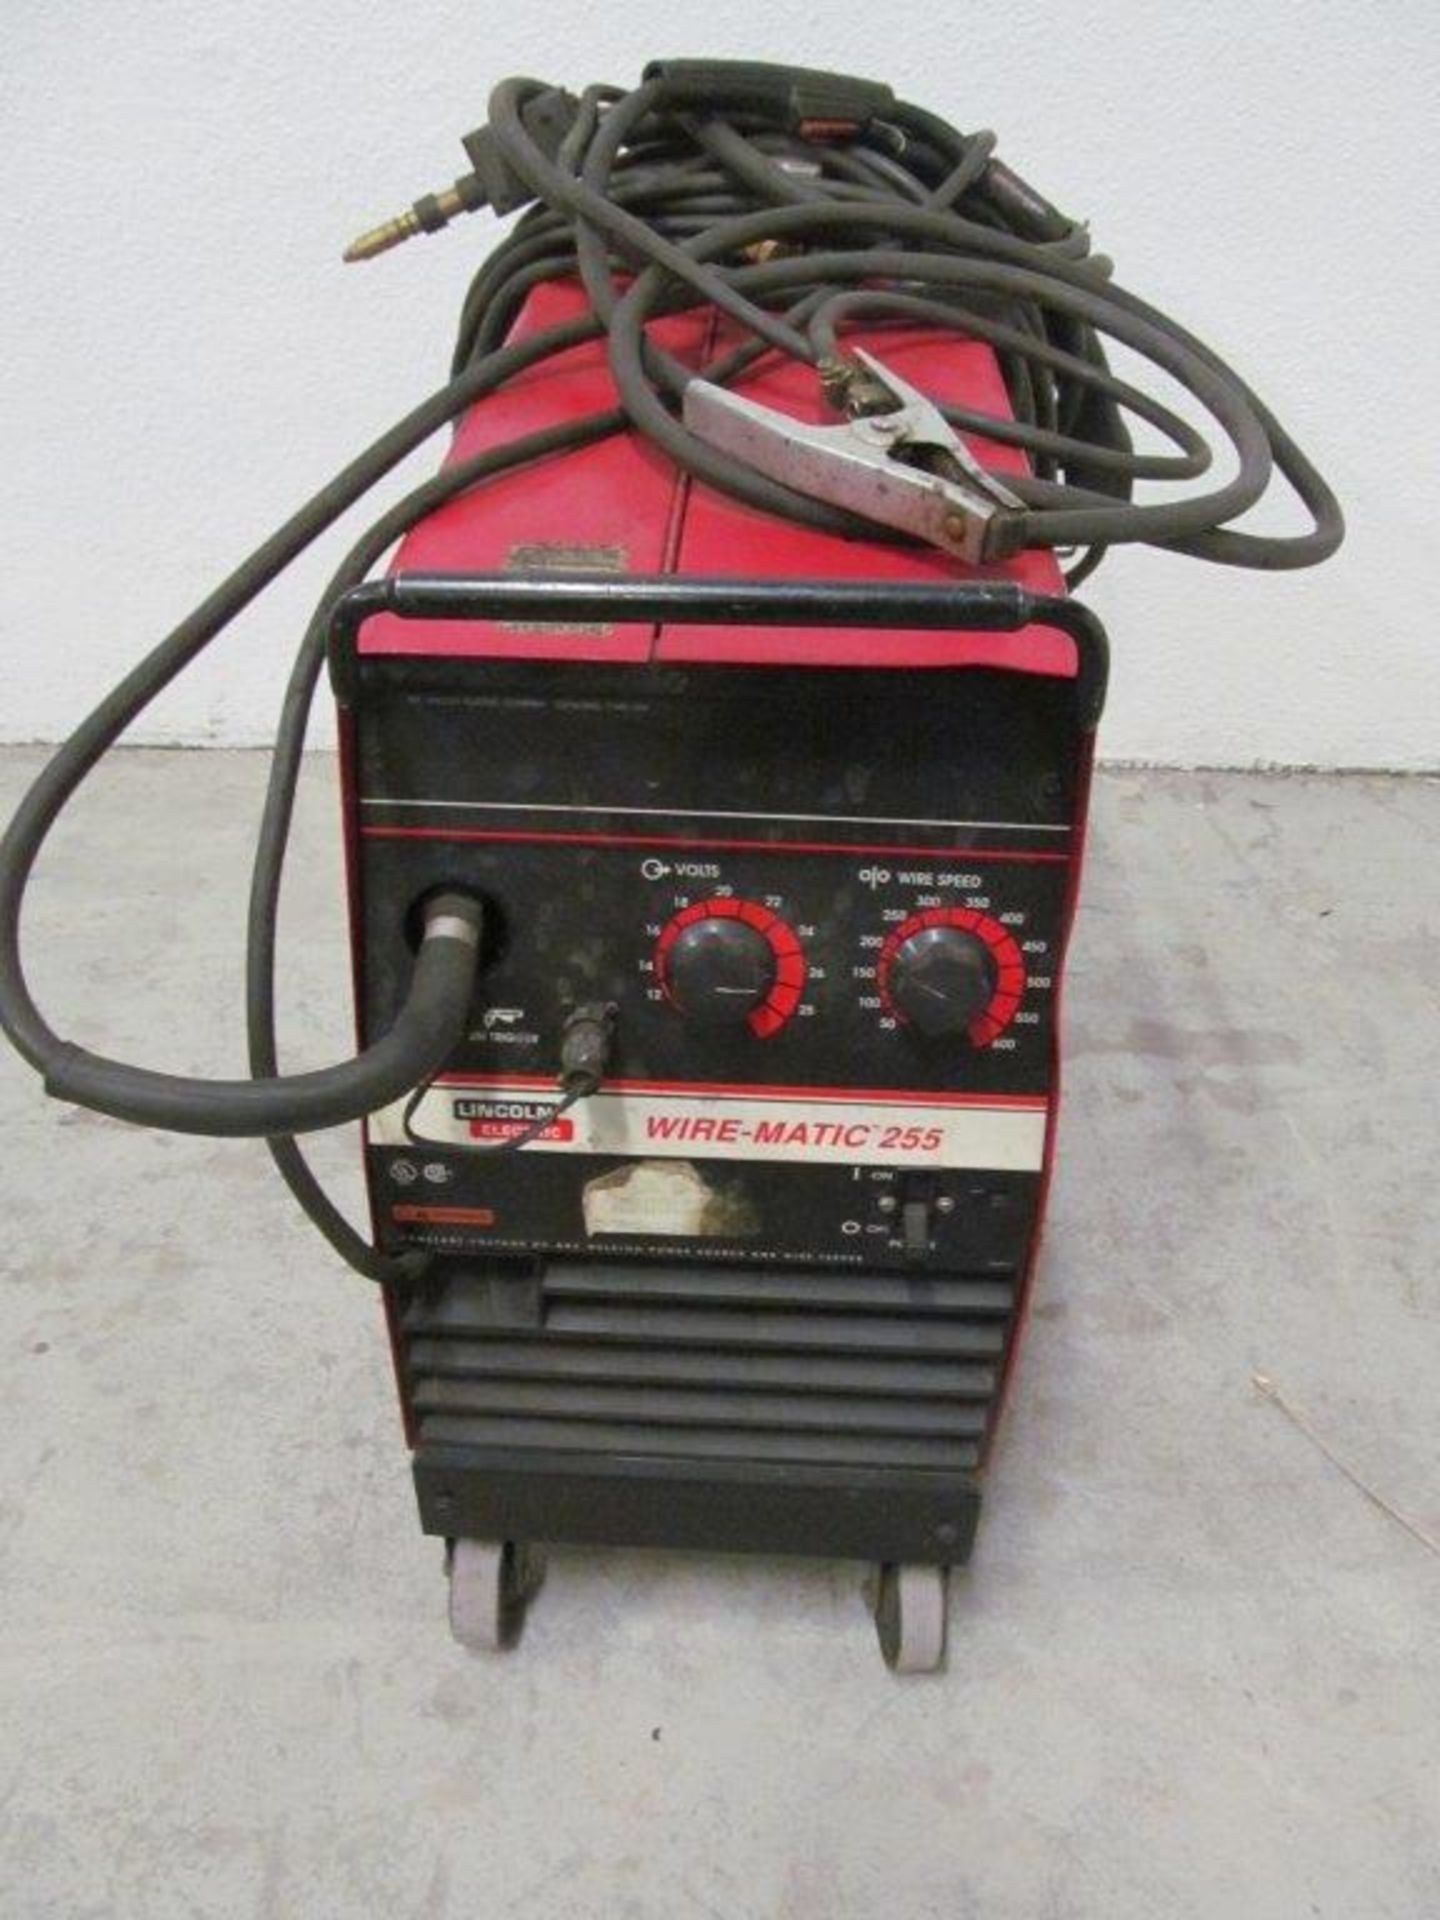 LINCOLN WIRE-MATIC 255 DC WELDER WITH WIRE FEEDER, S/N: U1950319563, ELECTRICS: 208V/230V/3PH/60C - Image 2 of 4